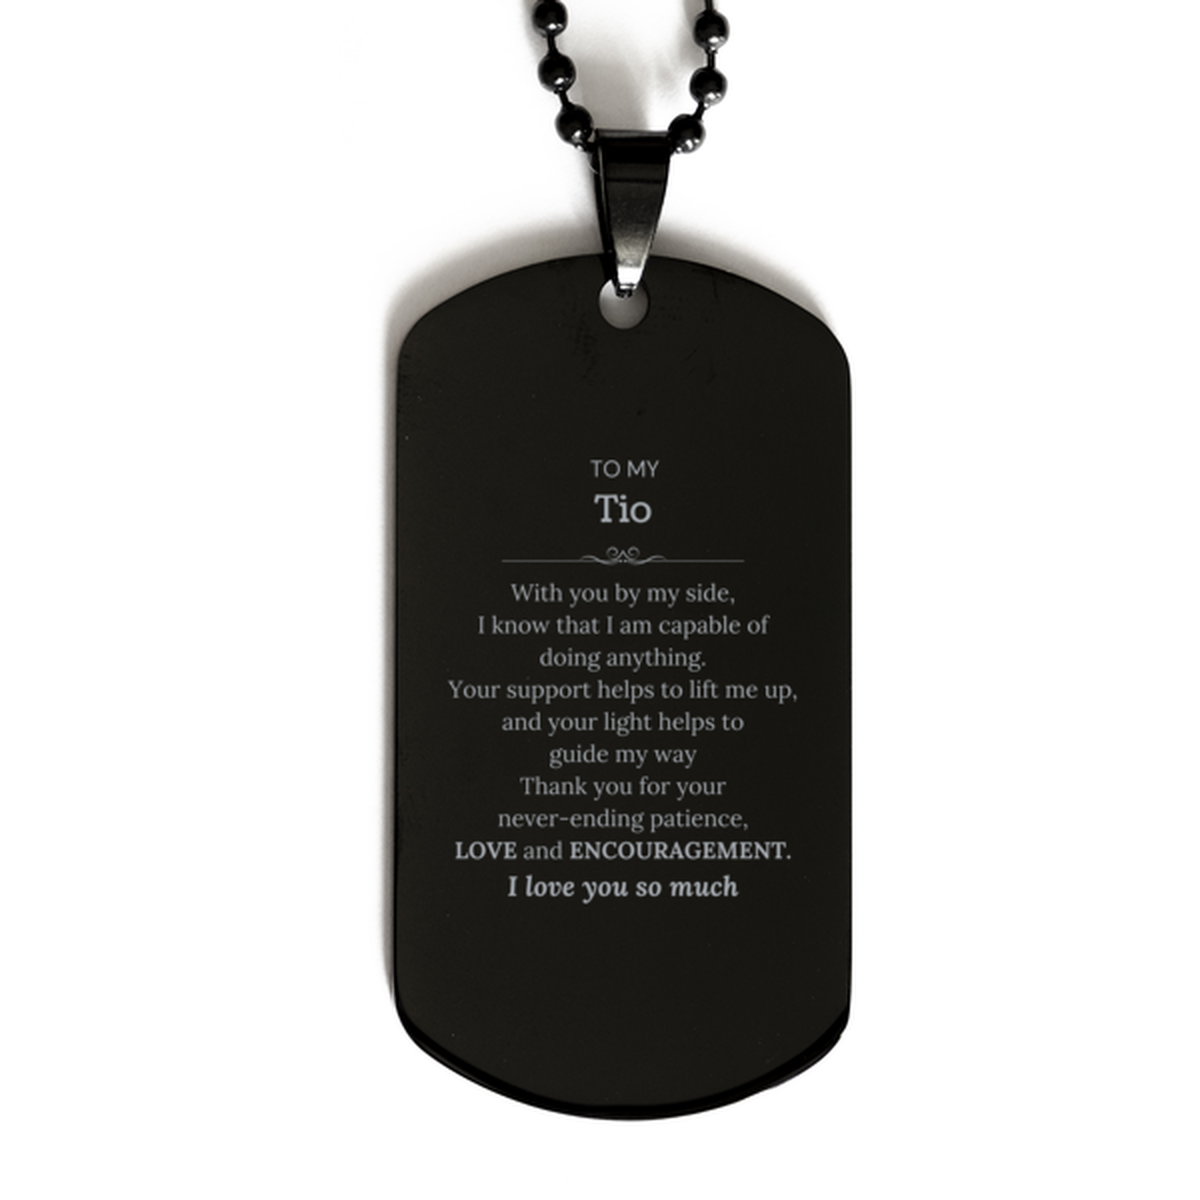 Appreciation Tio Black Dog Tag Gifts, To My Tio Birthday Christmas Wedding Keepsake Gifts for Tio With you by my side, I know that I am capable of doing anything. I love you so much